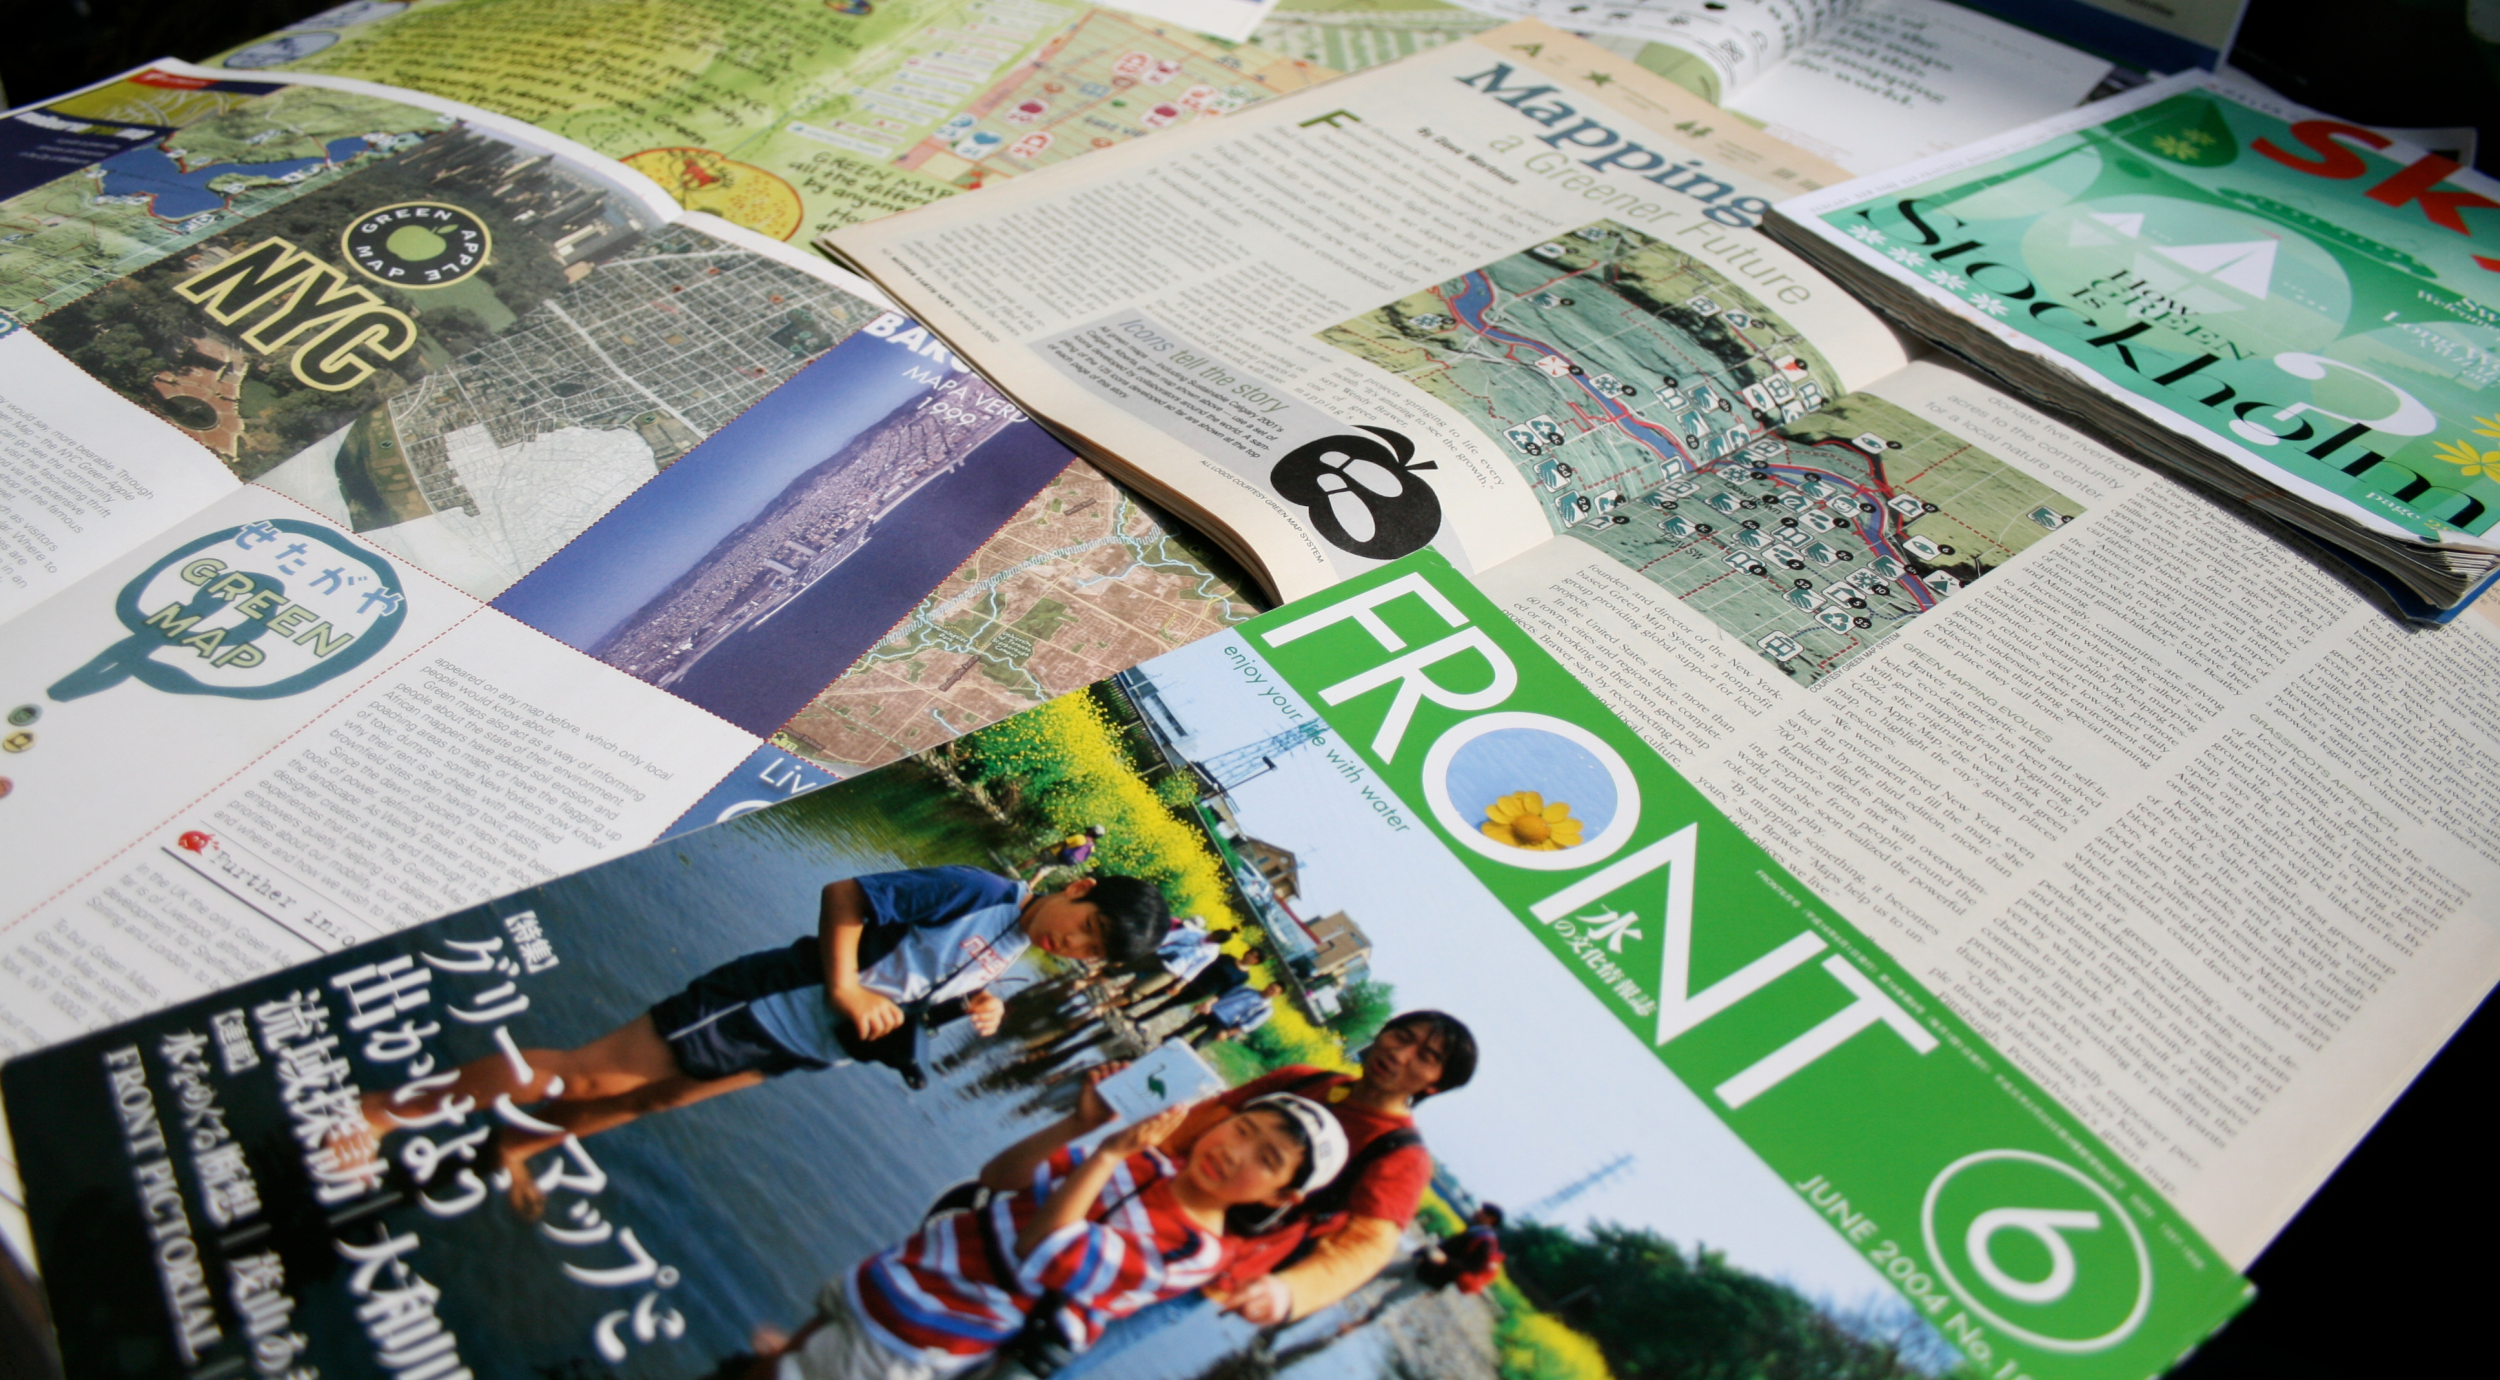 Green Map has appeared in magazines, books and other media around the world